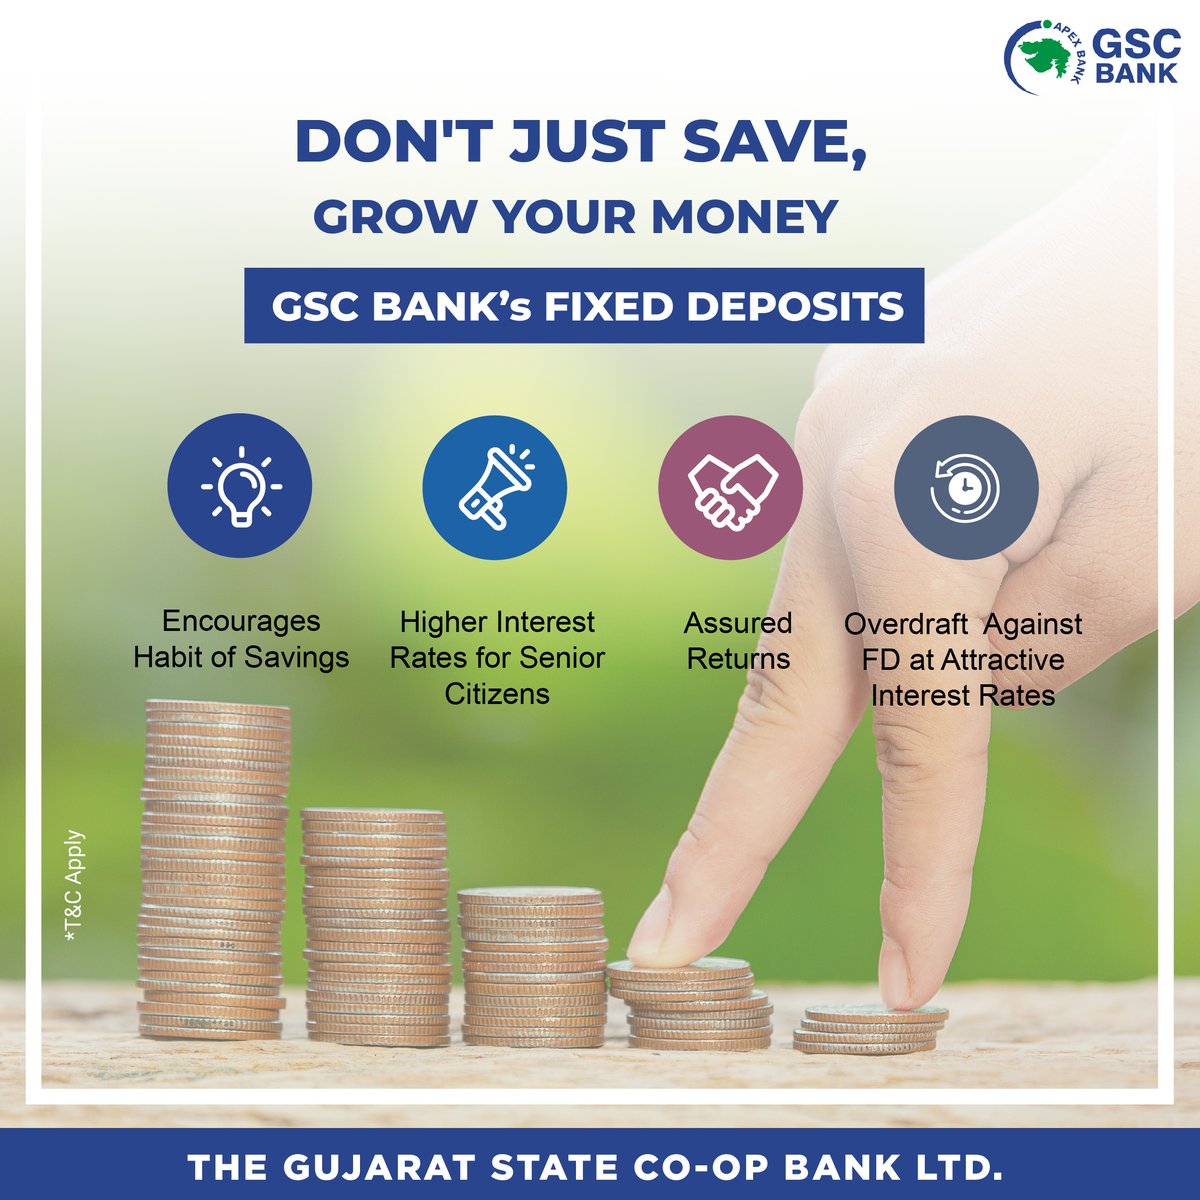 DON'T JUST SAVE, GROW YOUR MONEY WITH GSC BANK'S FIXED DEPOSITS.
At Attractive Interest Rates.
#GSCB #banking #Deposits #savings #fixeddeposit #investment #finance #fd #money #bank #recurringdeposit #financialplanning #visityournearestbranchtoday